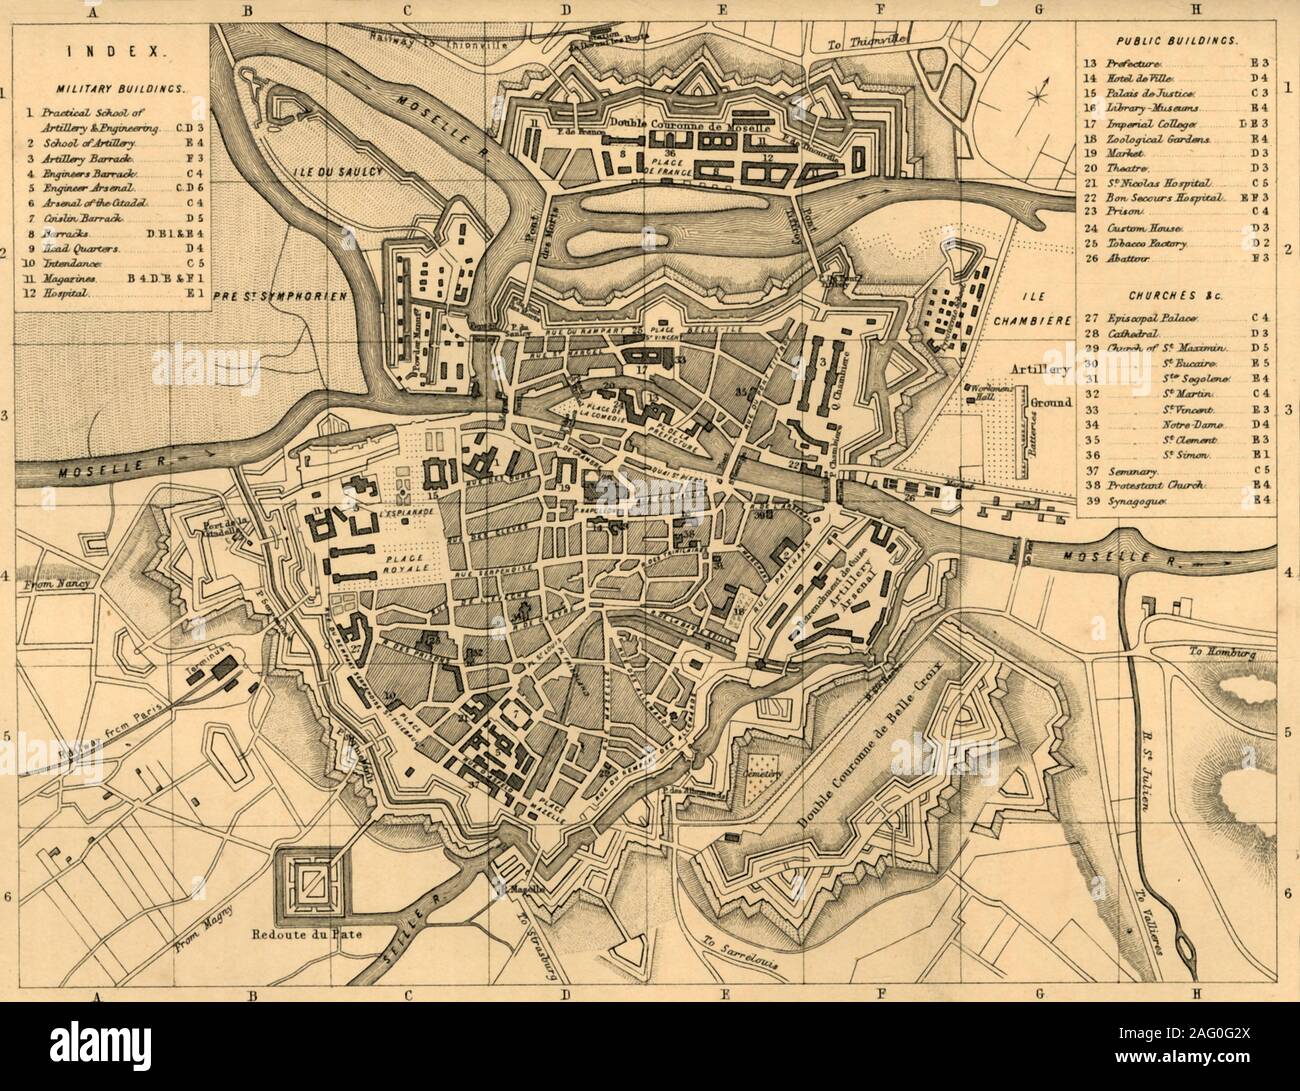 'Plan of Metz and its Fortifications', c1872. Map of the town of Metz (in France), showing 'military buildings, public buildings, churches etc'. The Siege of Metz (19 August-27 October 1870) during the Franco-Prussian War, ended in a decisive Allied German victory. From &quot;The Franco-Prussian War: its causes, incidents and consequences&quot;, Volume I, by Captain H M Hozier. [William Mackenzie, London, 1872] Stock Photo